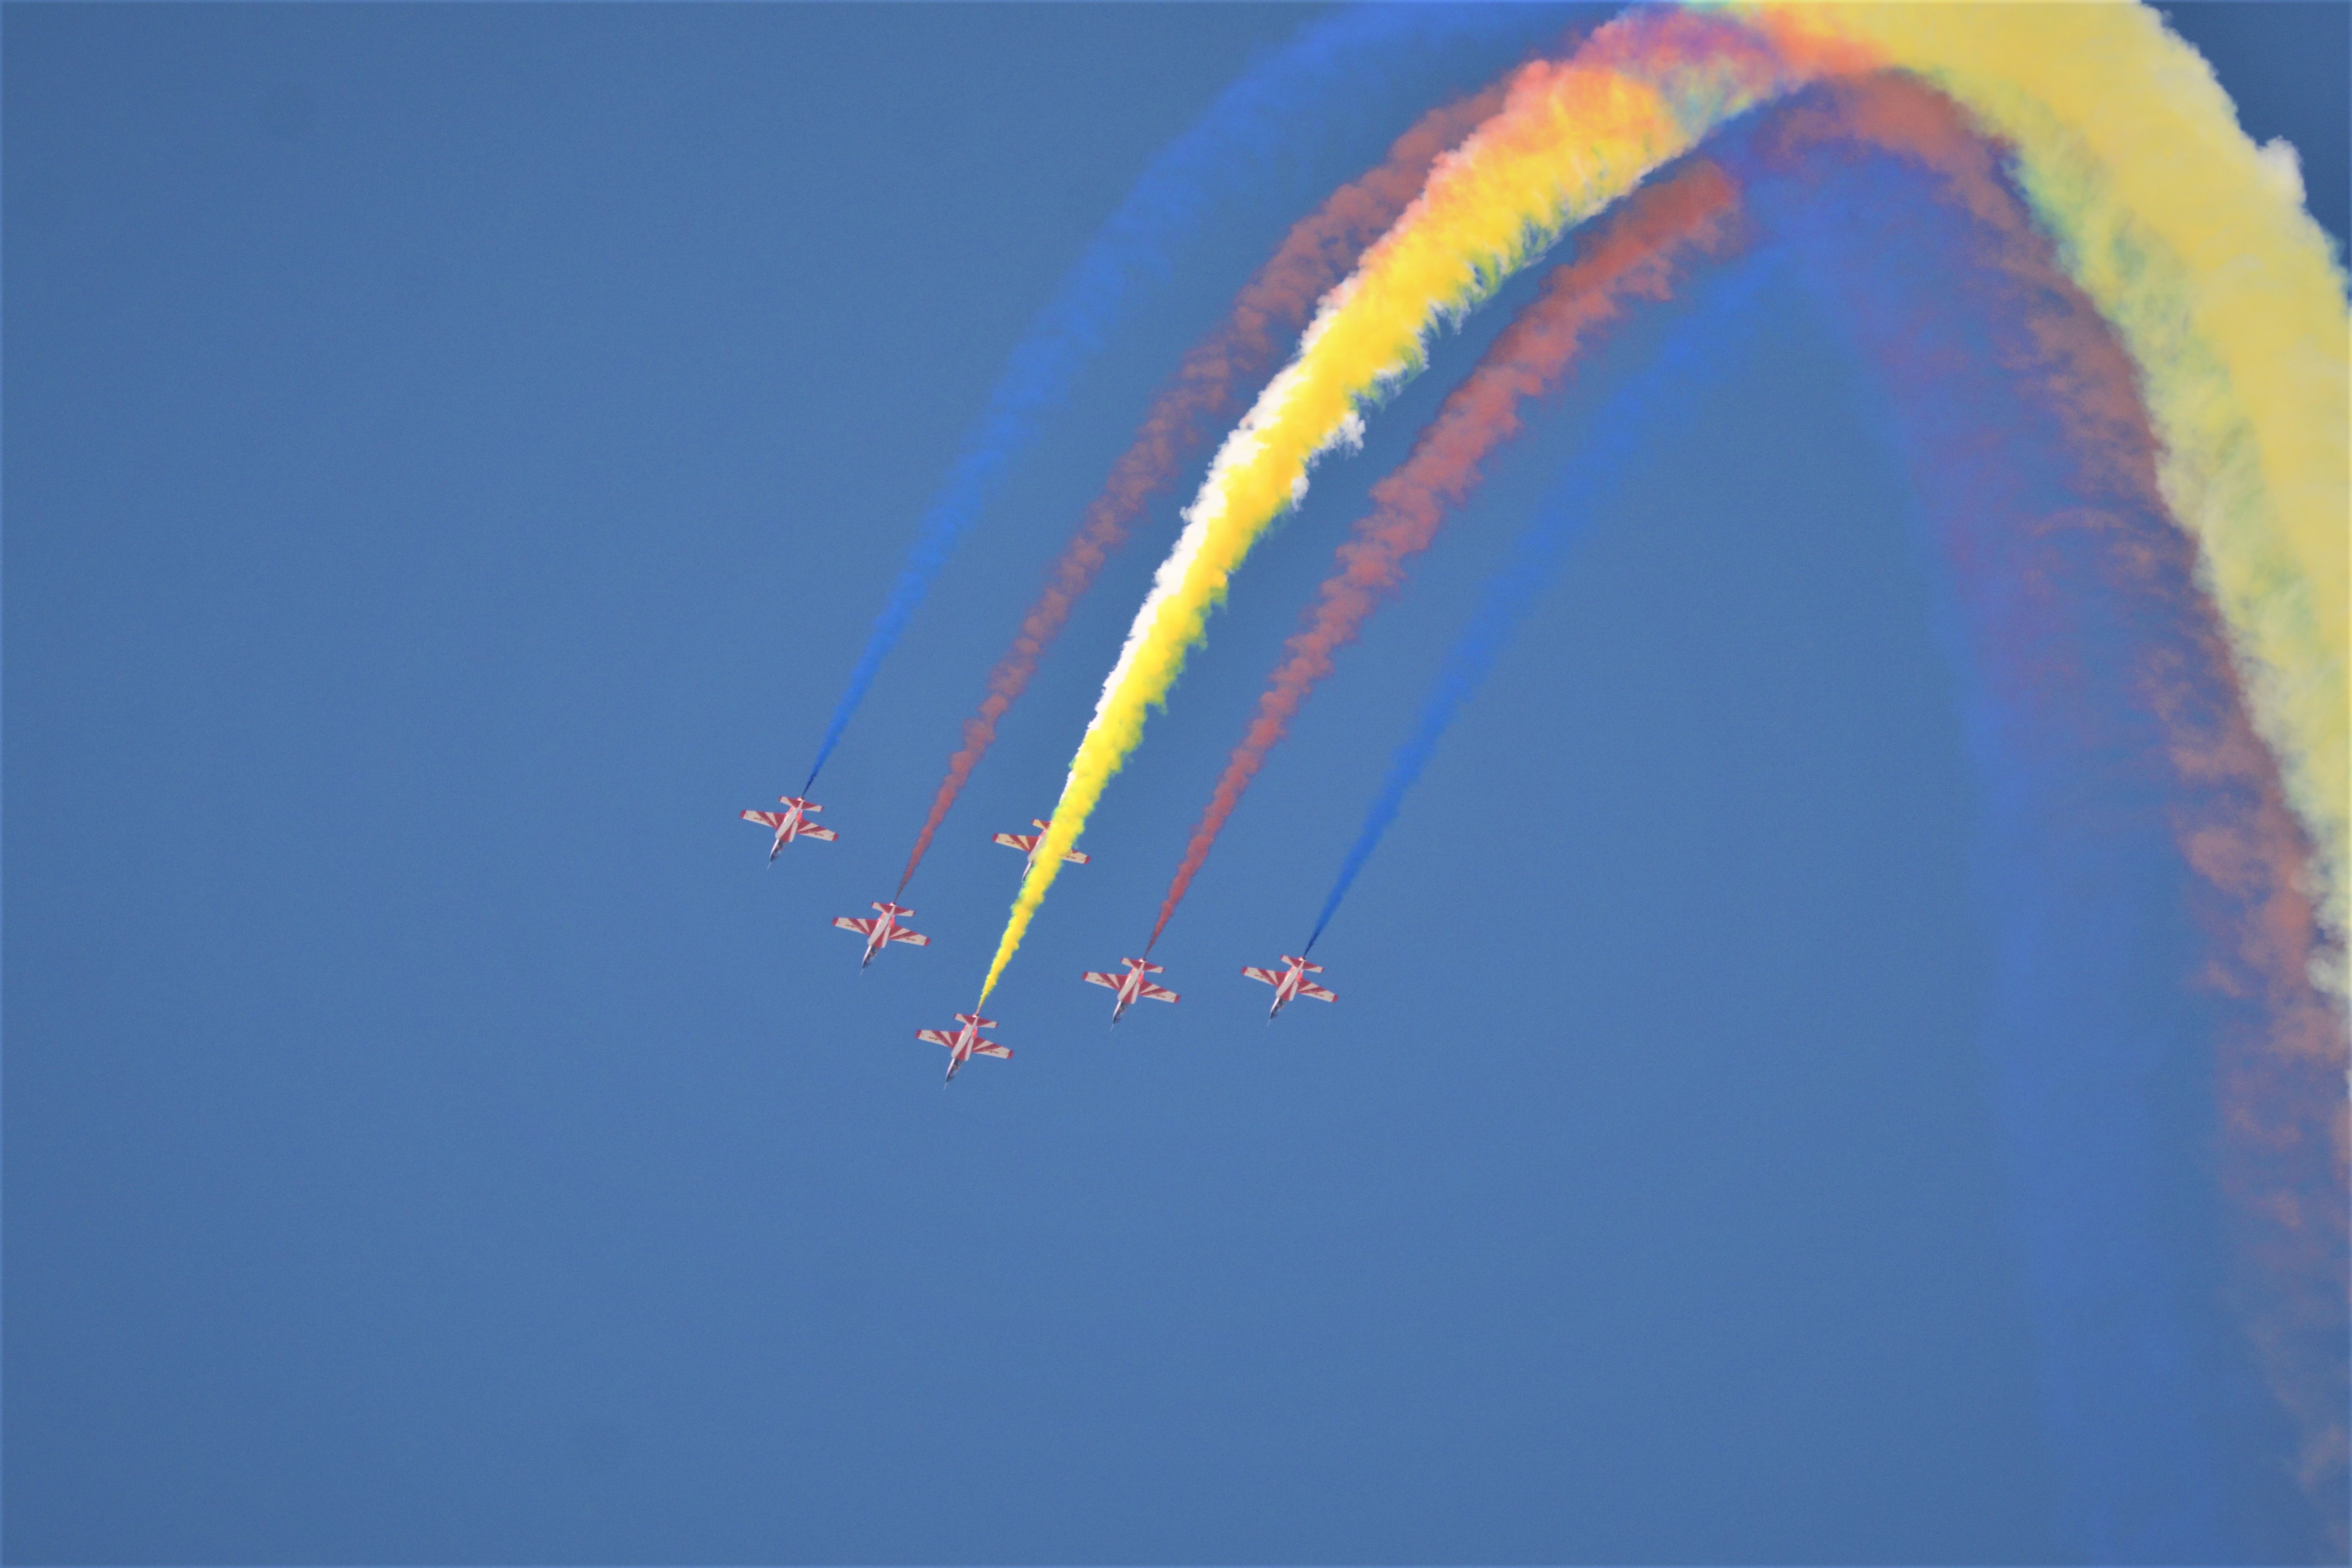 General 4800x3200 Flight aircraft vehicle jets aerobatic team Formation flying colored smoke smoke airshows PLAAF